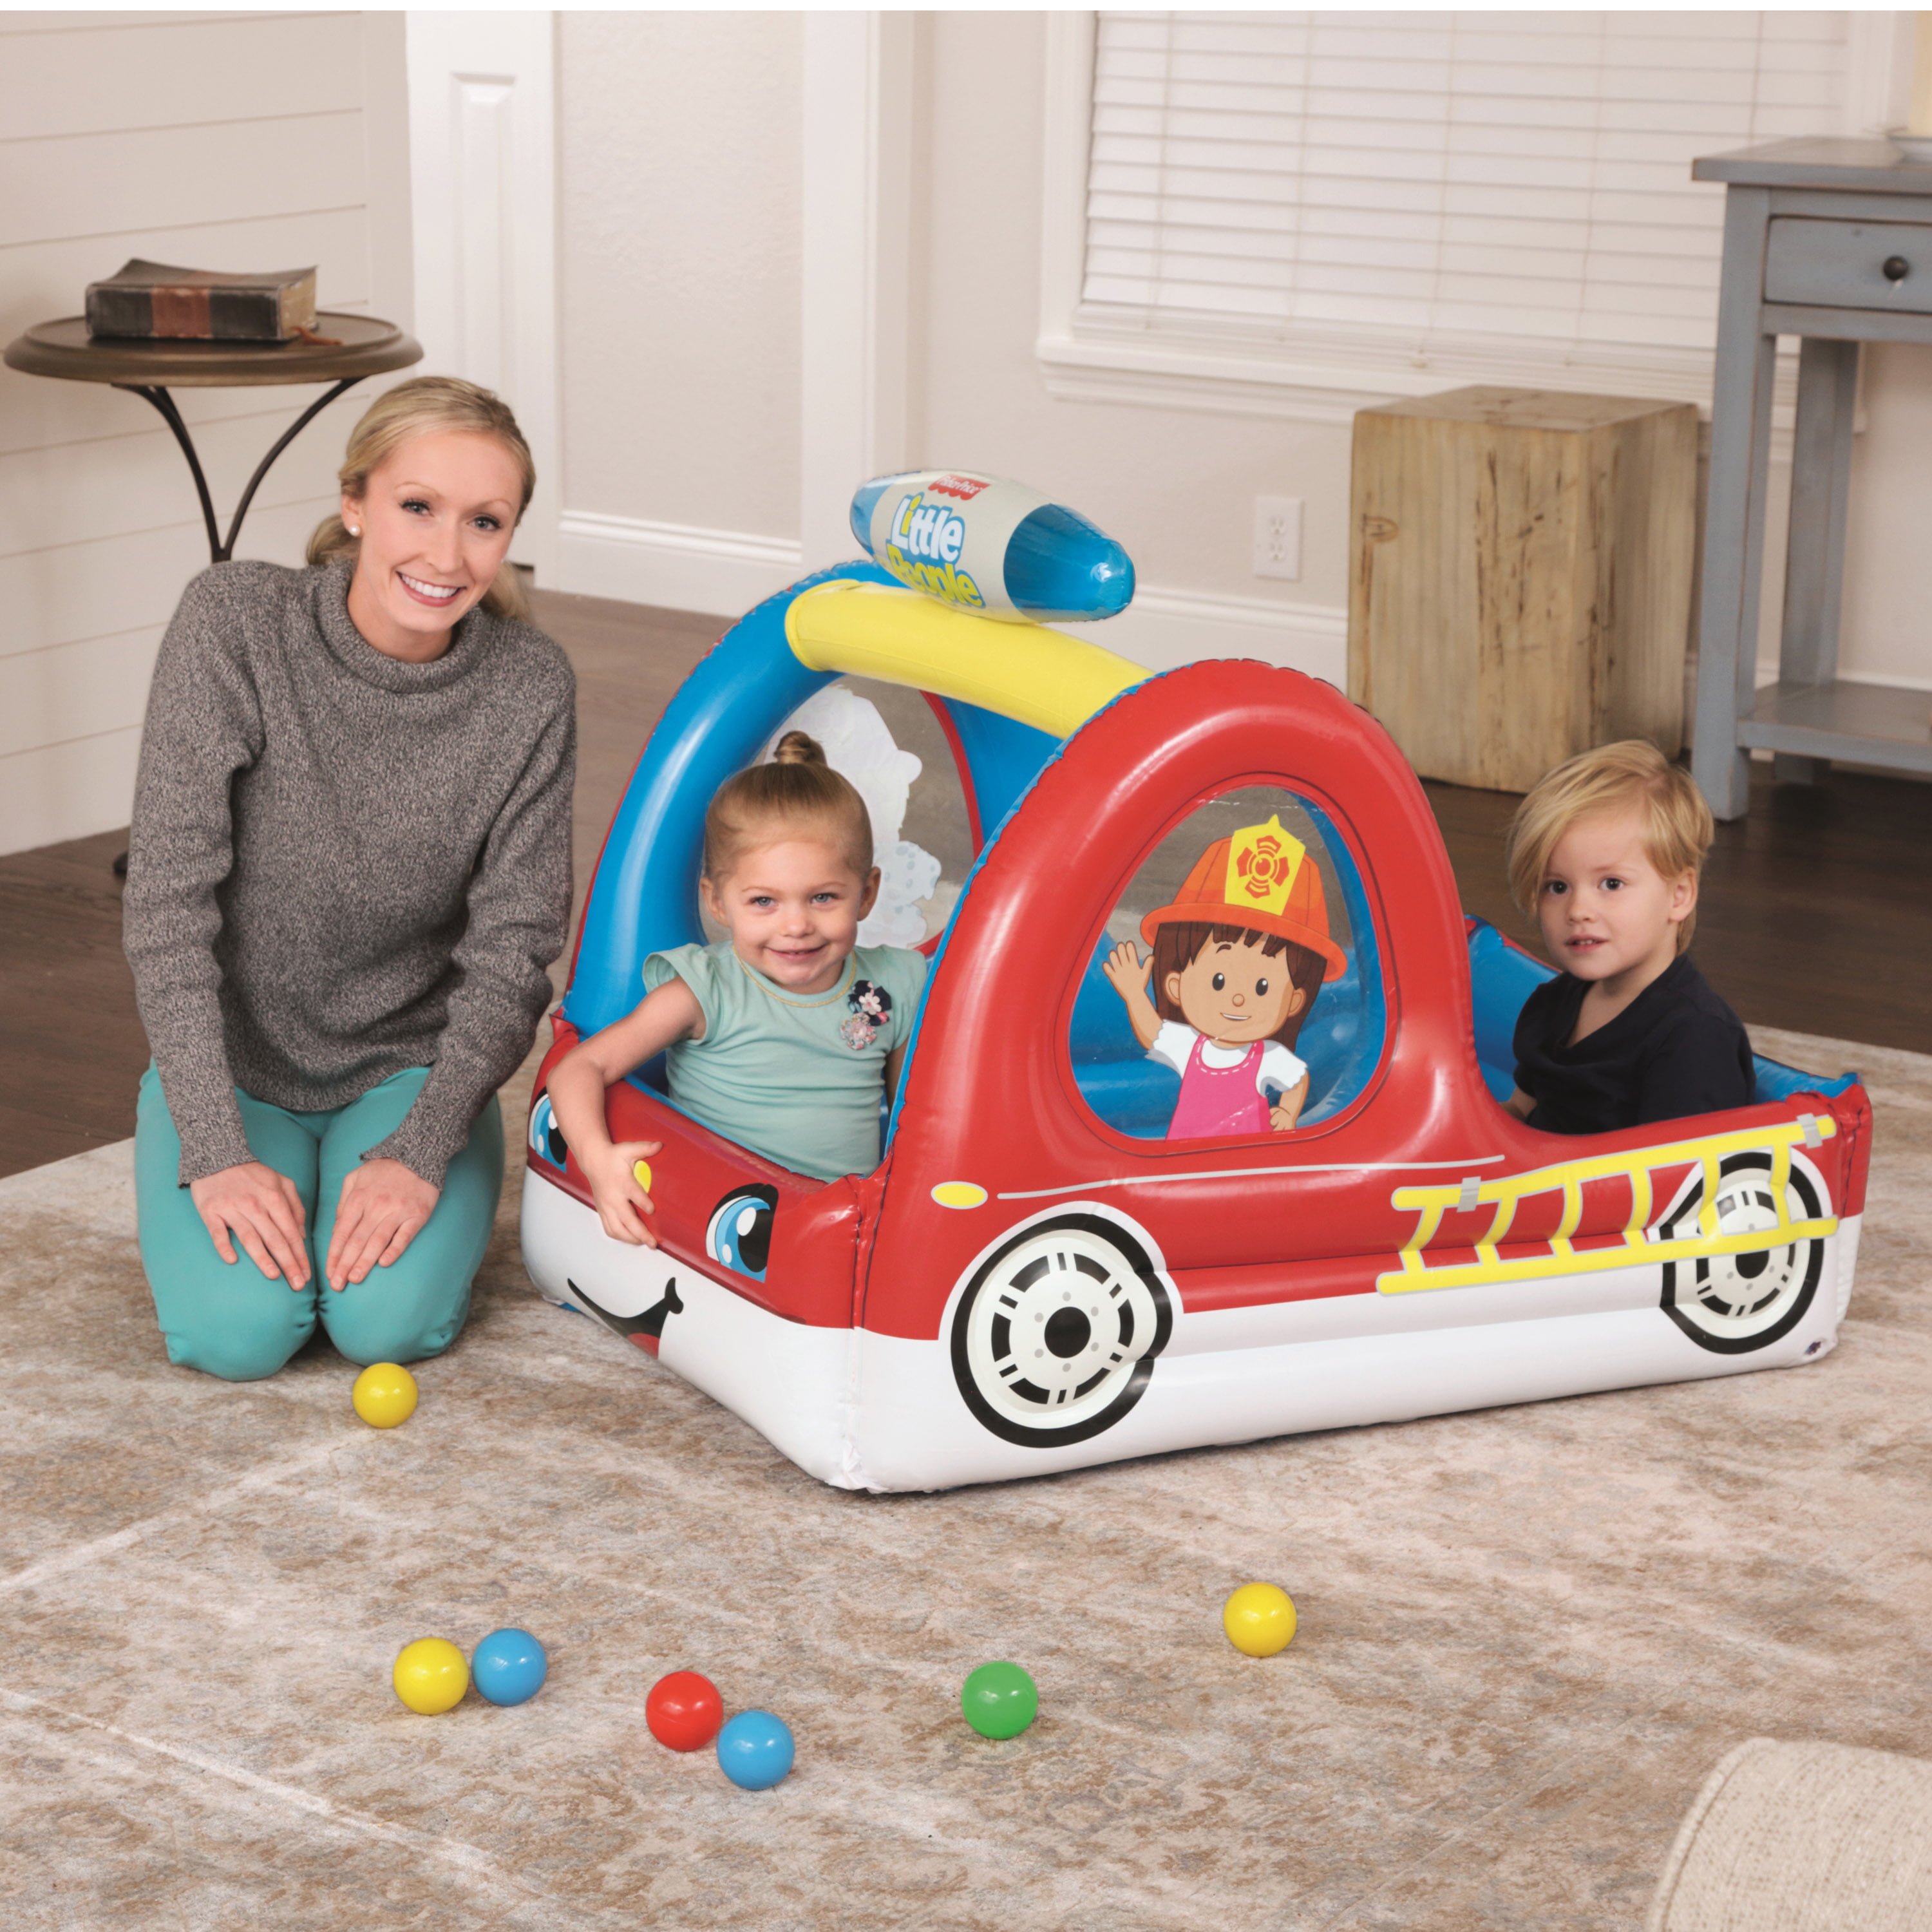 Fisher-Price 93531E Inflatable Toddler Kids Truck Ball Pit with 25 Play Balls